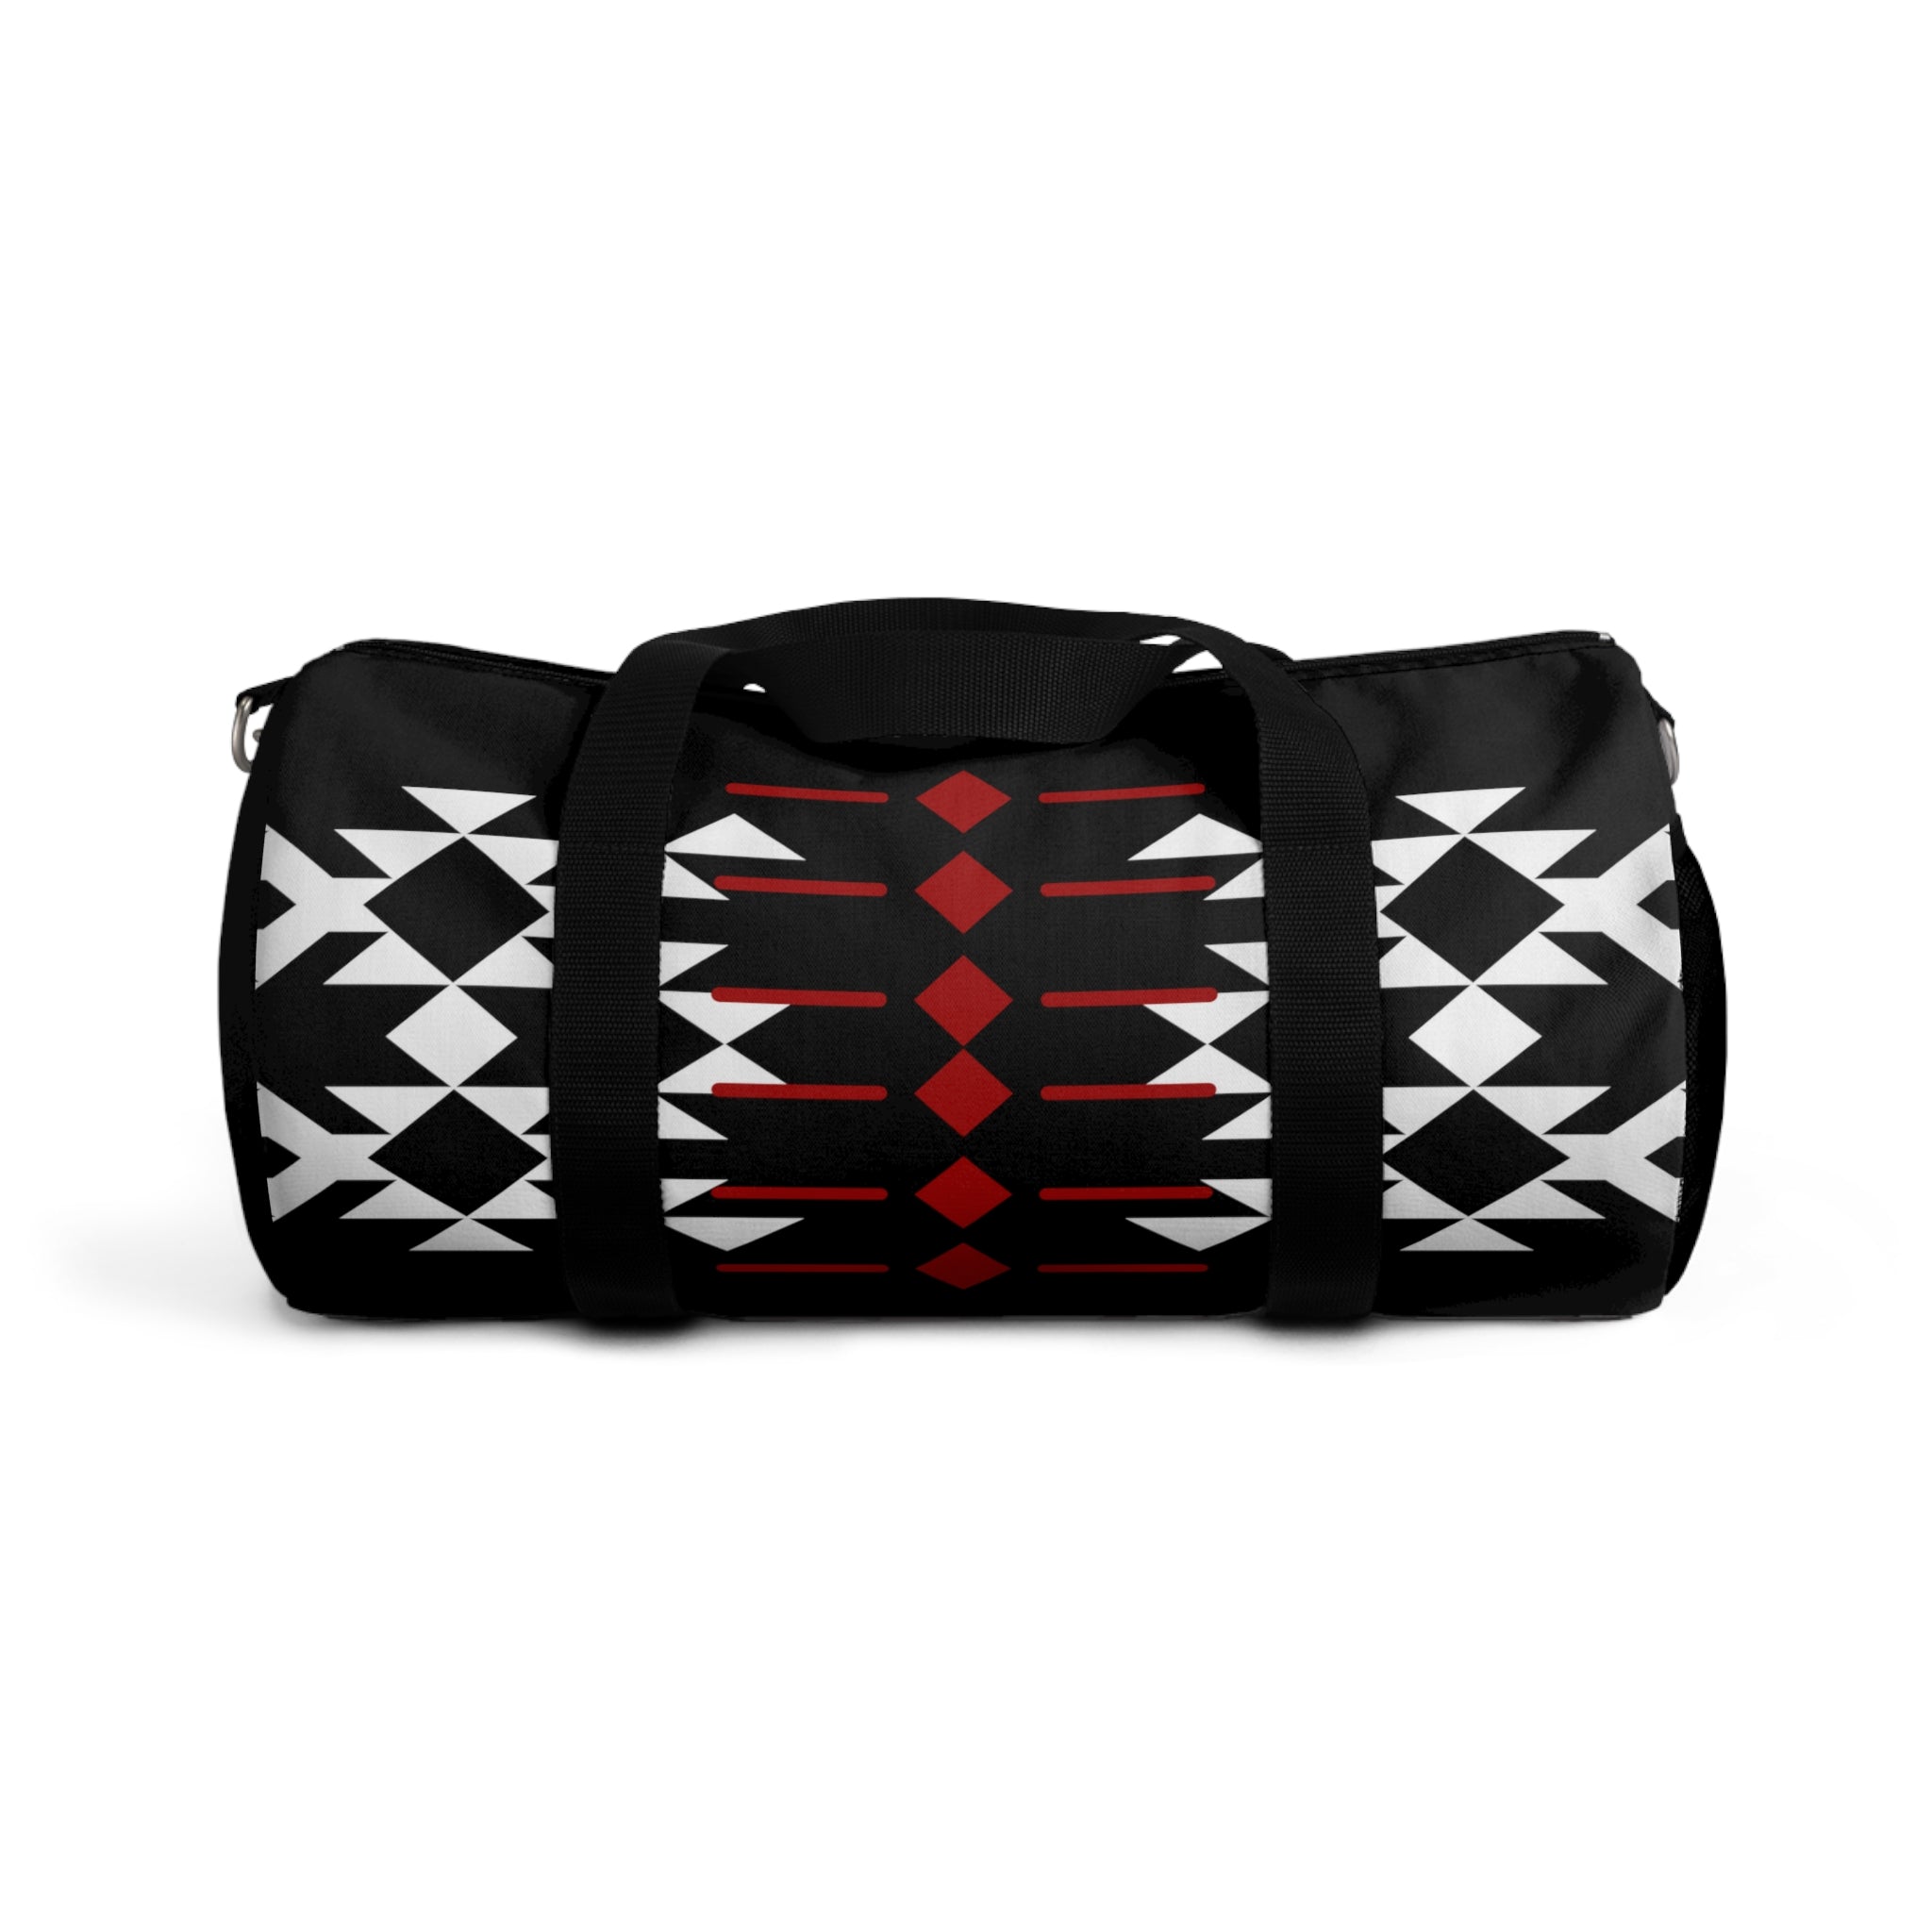 Black, Red, and White Warrior Duffel Bag, Small